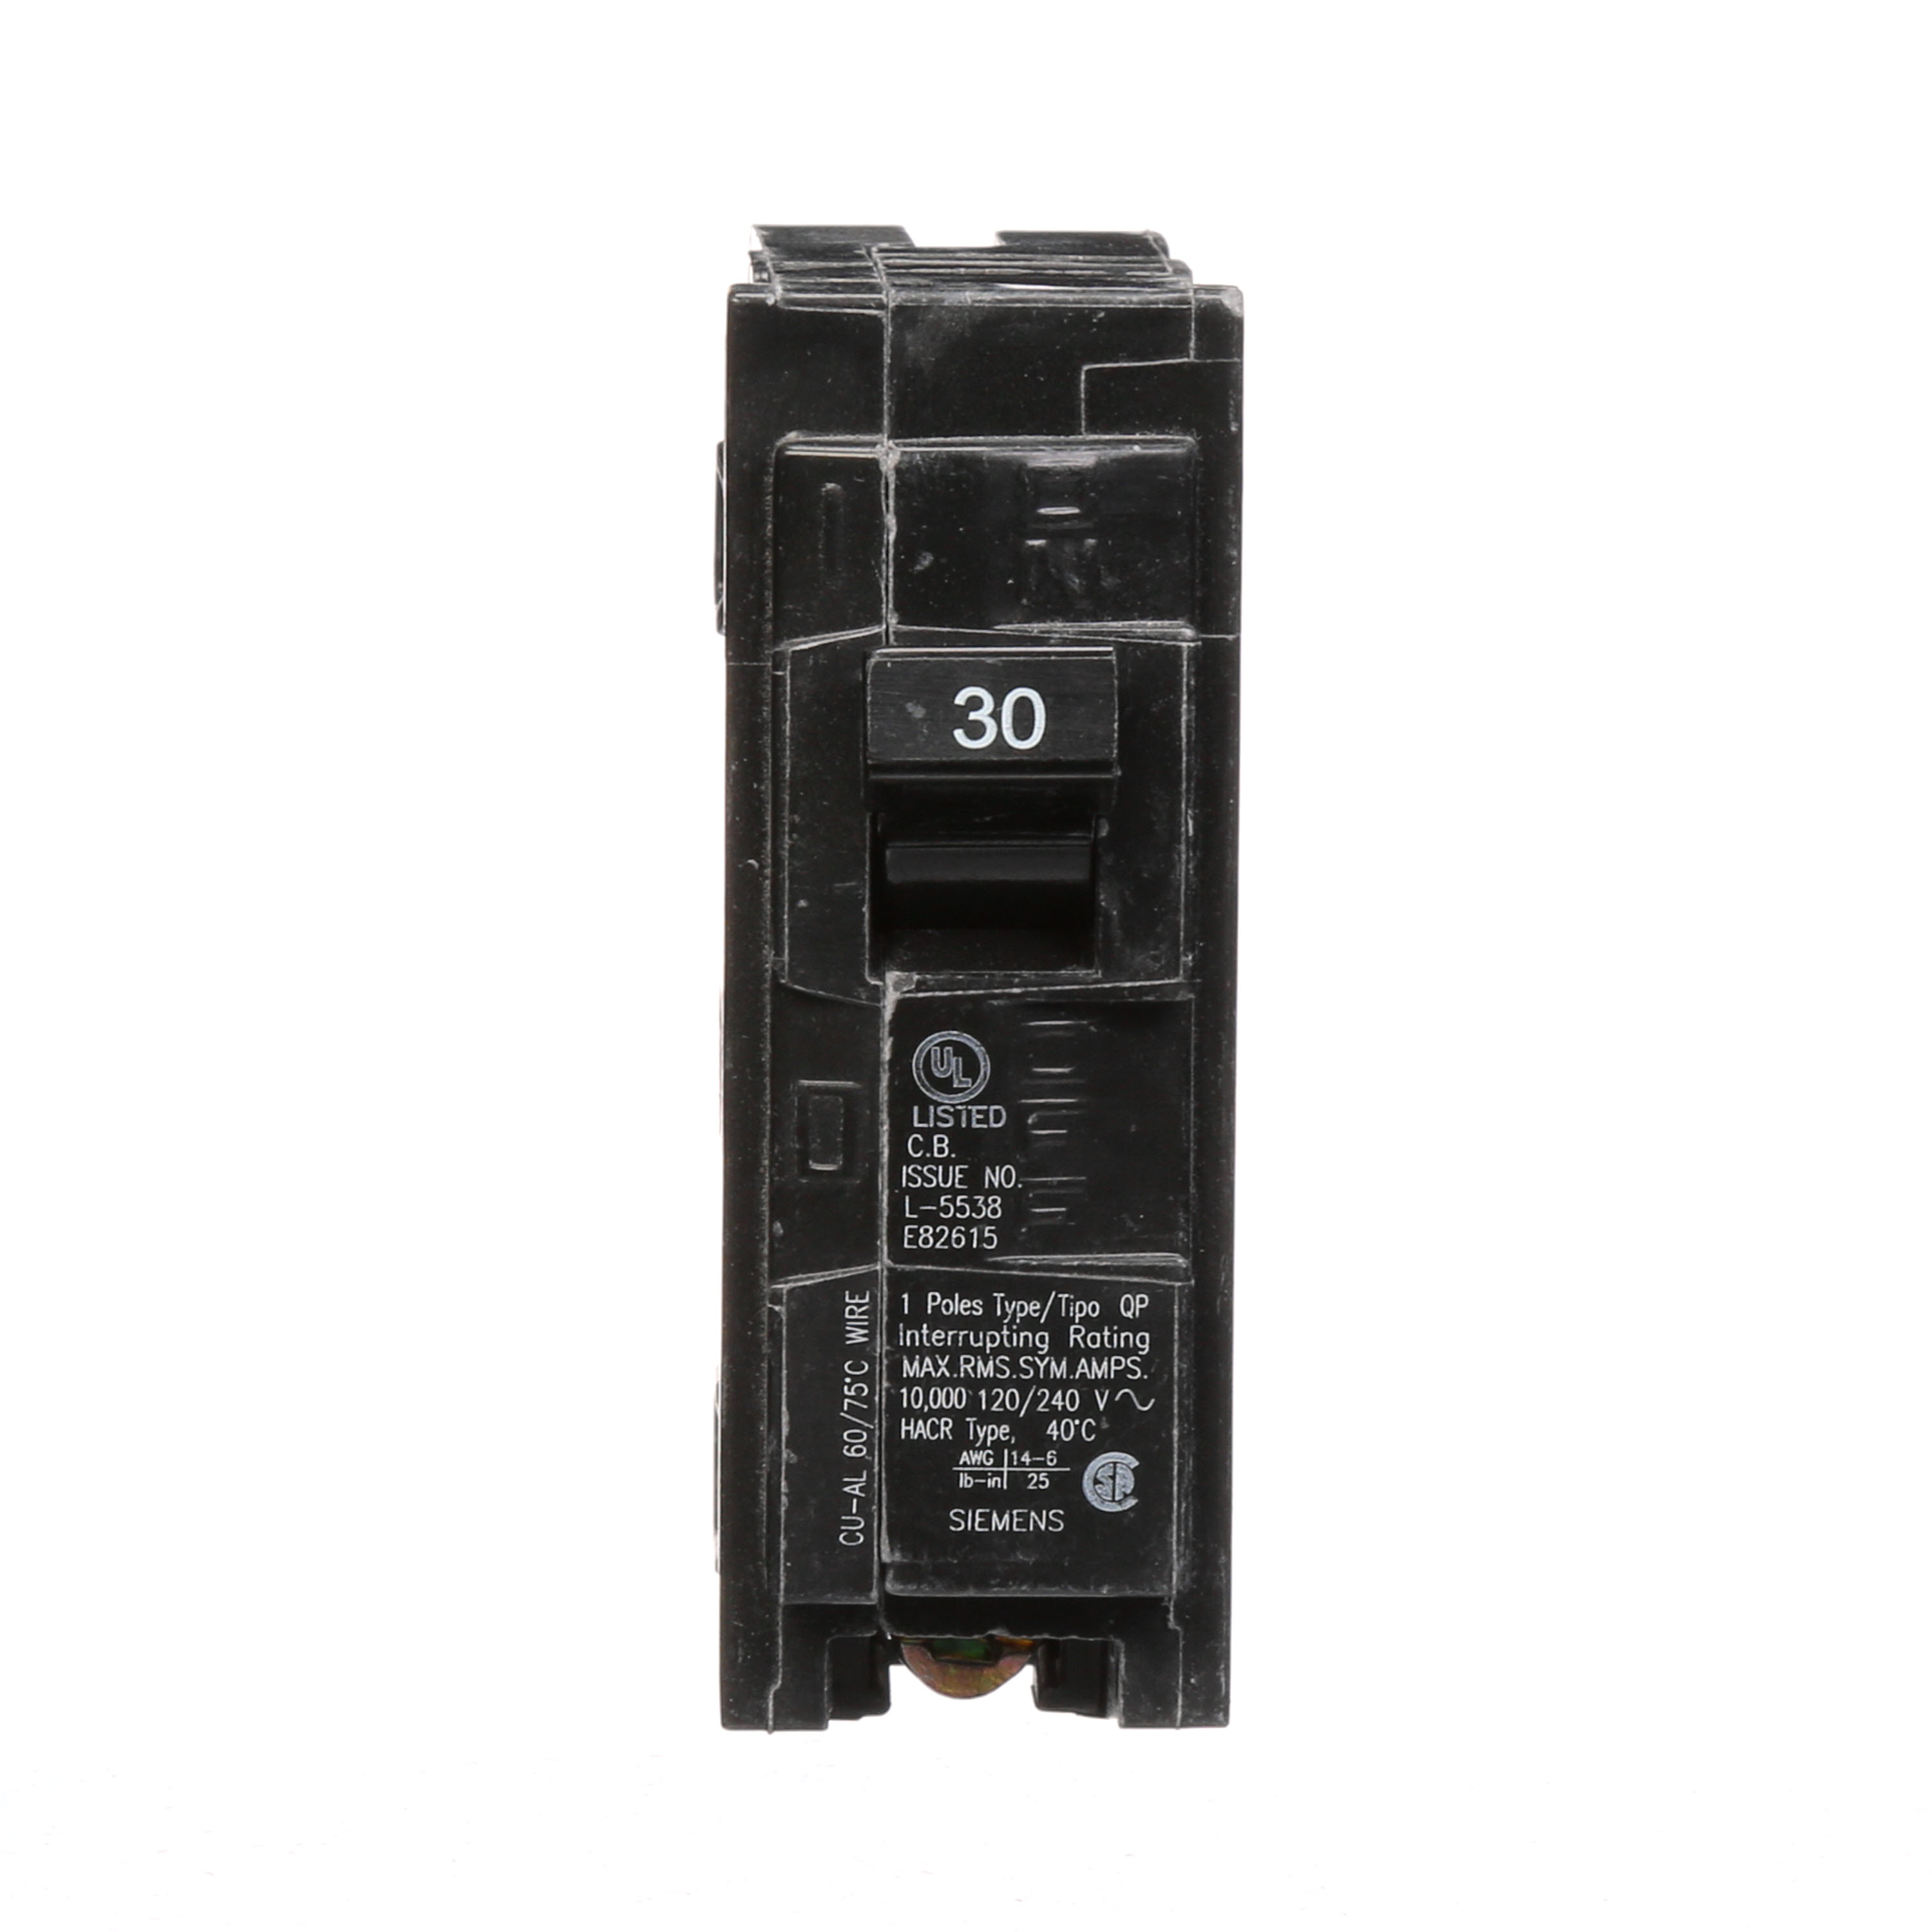 Siemens Low Voltage Residential Circuit Breakers Miniature Thermal Mag Circuit Breakers - Type QP/MP 1-pole 10k are Circuit Protection Load Center Mains, Feeders, and Miniature Circuit Breakers. BREAKER 30A 1P 120V 10K QP